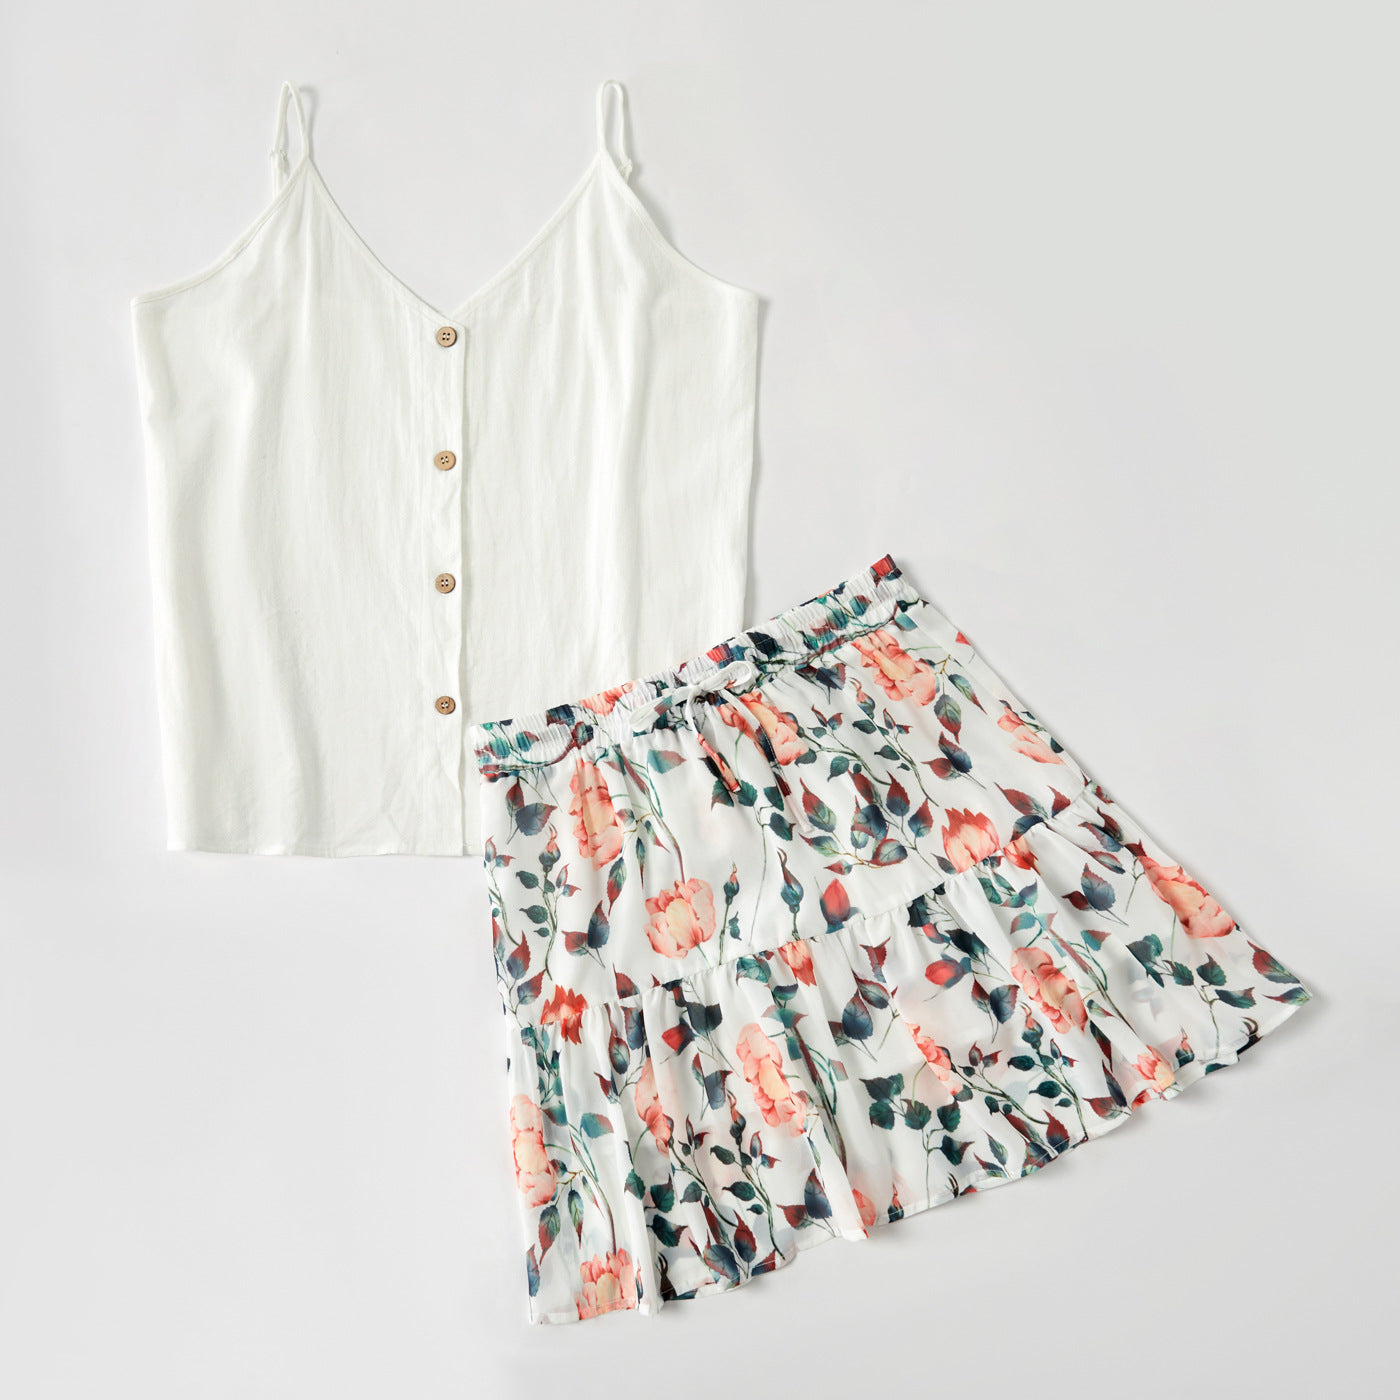 Floral Print Splicing Strap Top and Skirt for Mom and Me